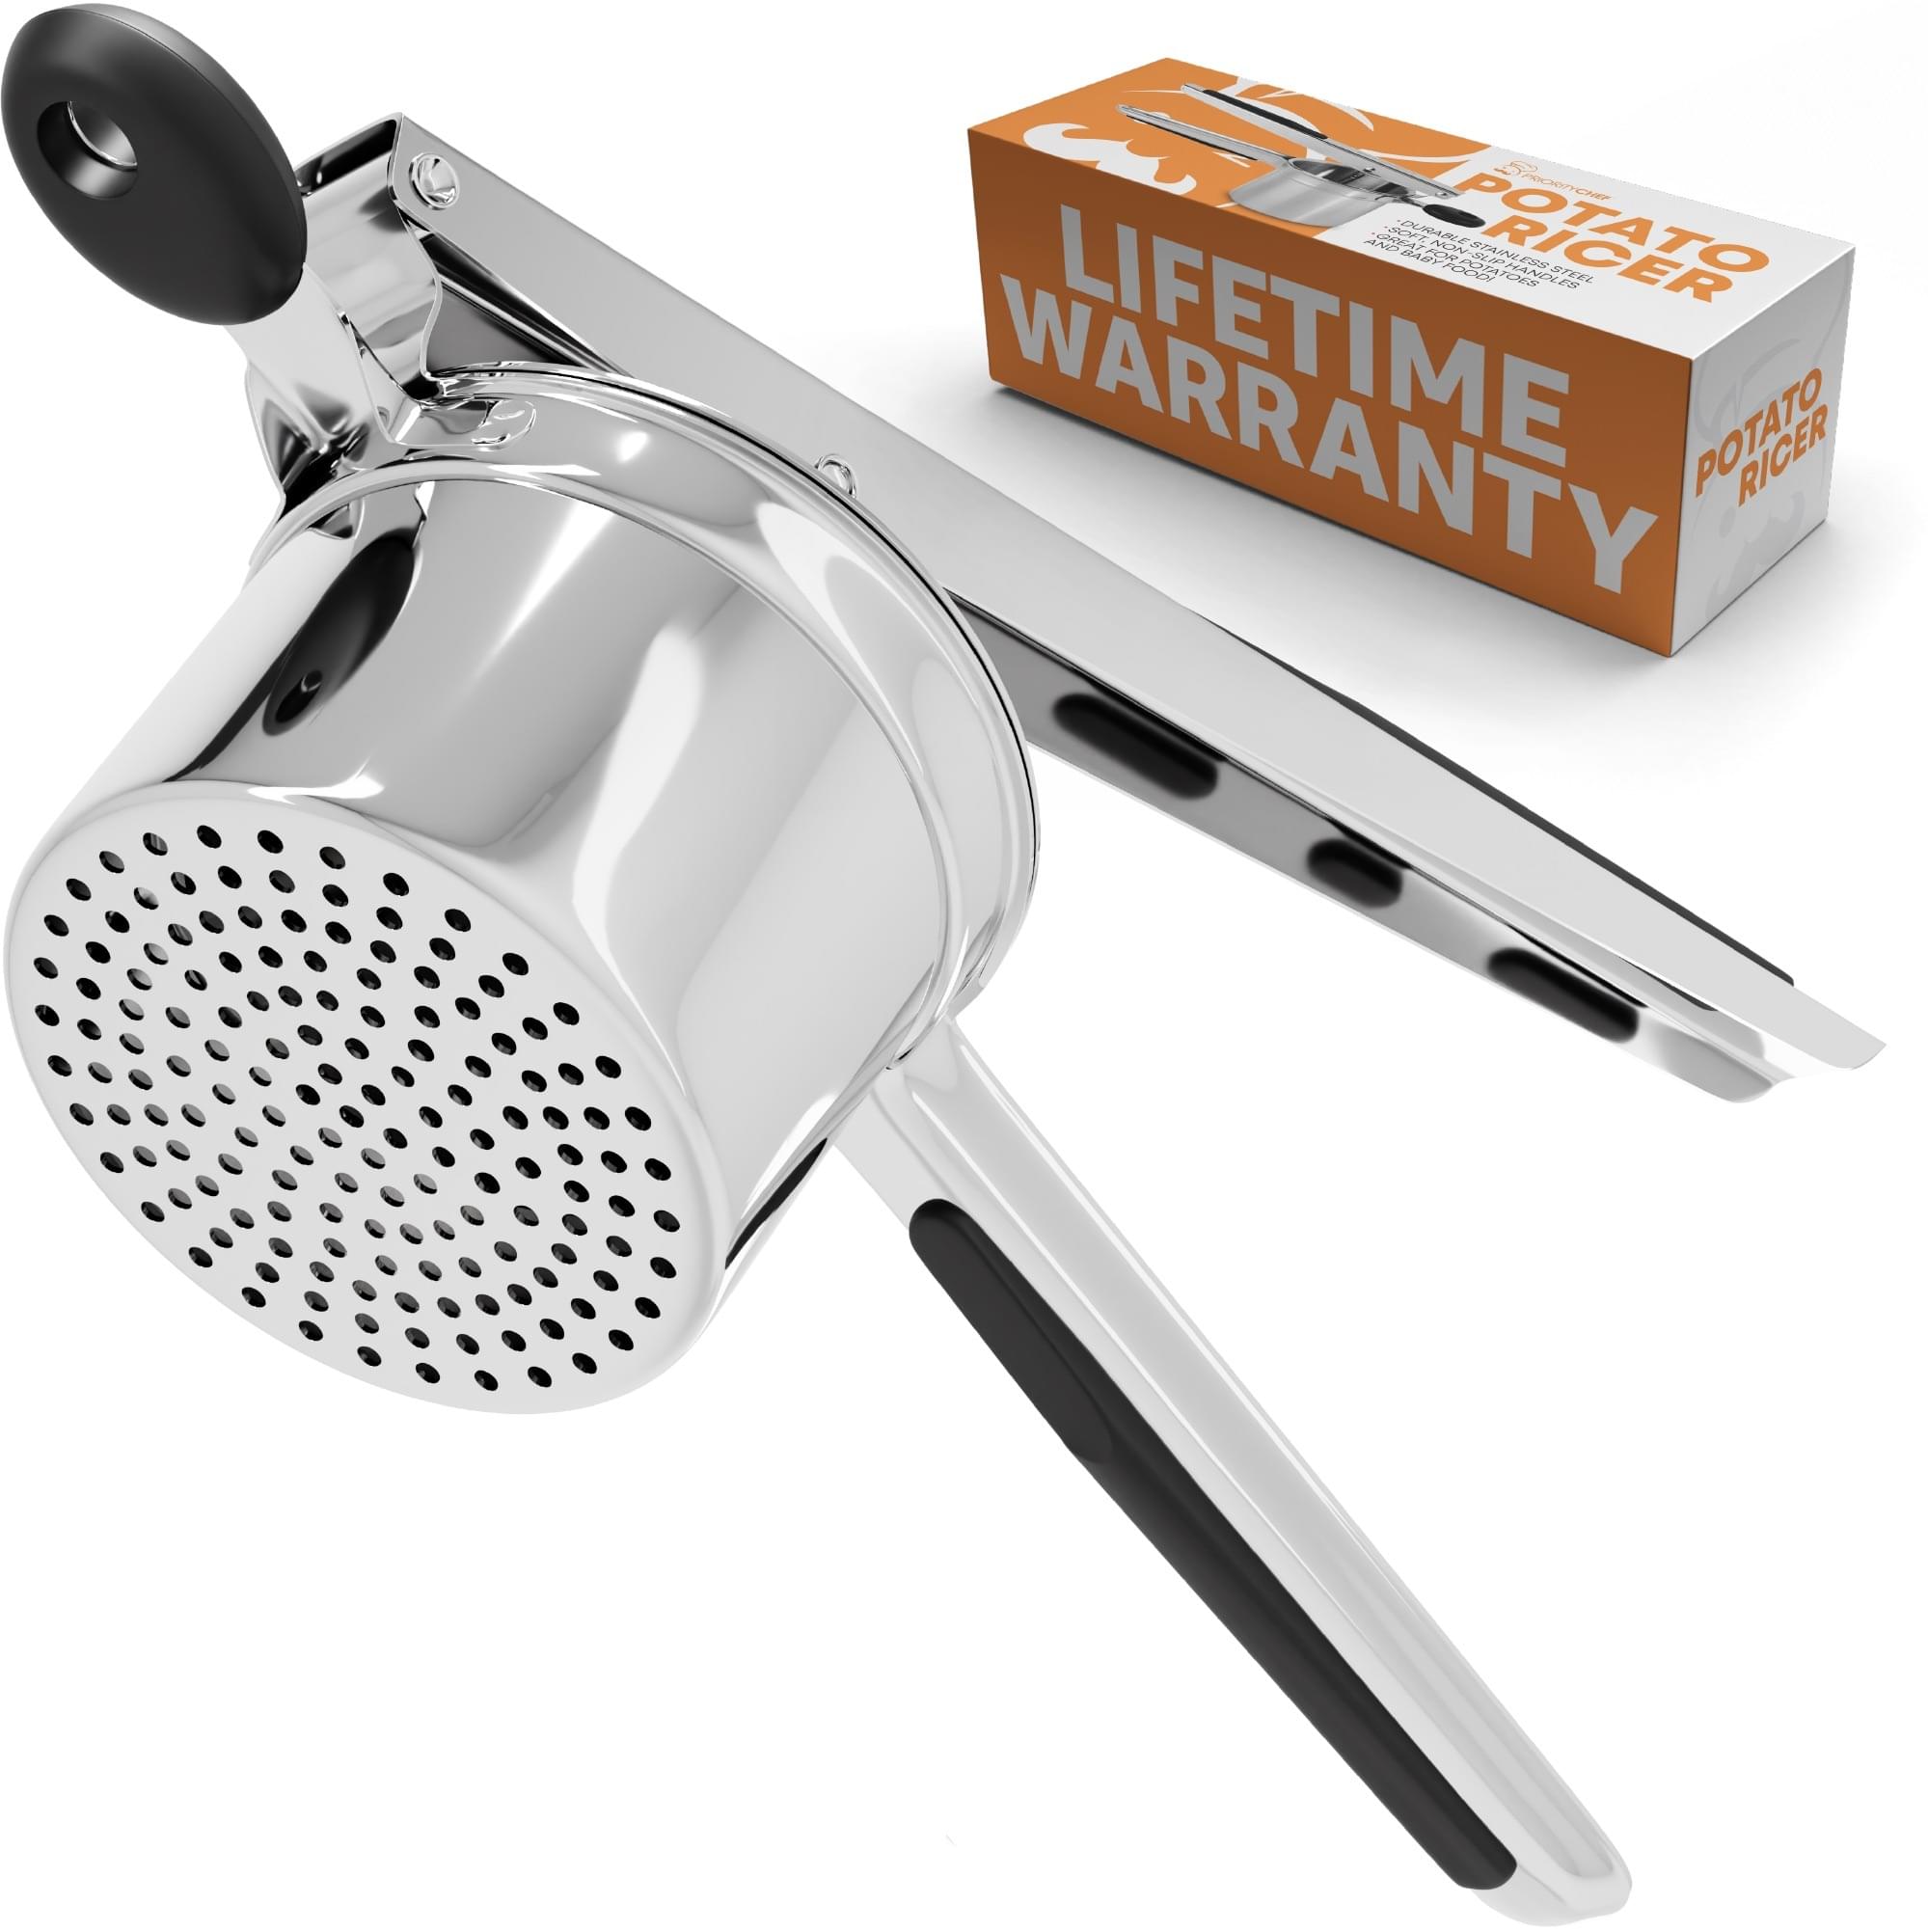 PriorityChef Potato Ricer - 1 Year Warranty Sign up